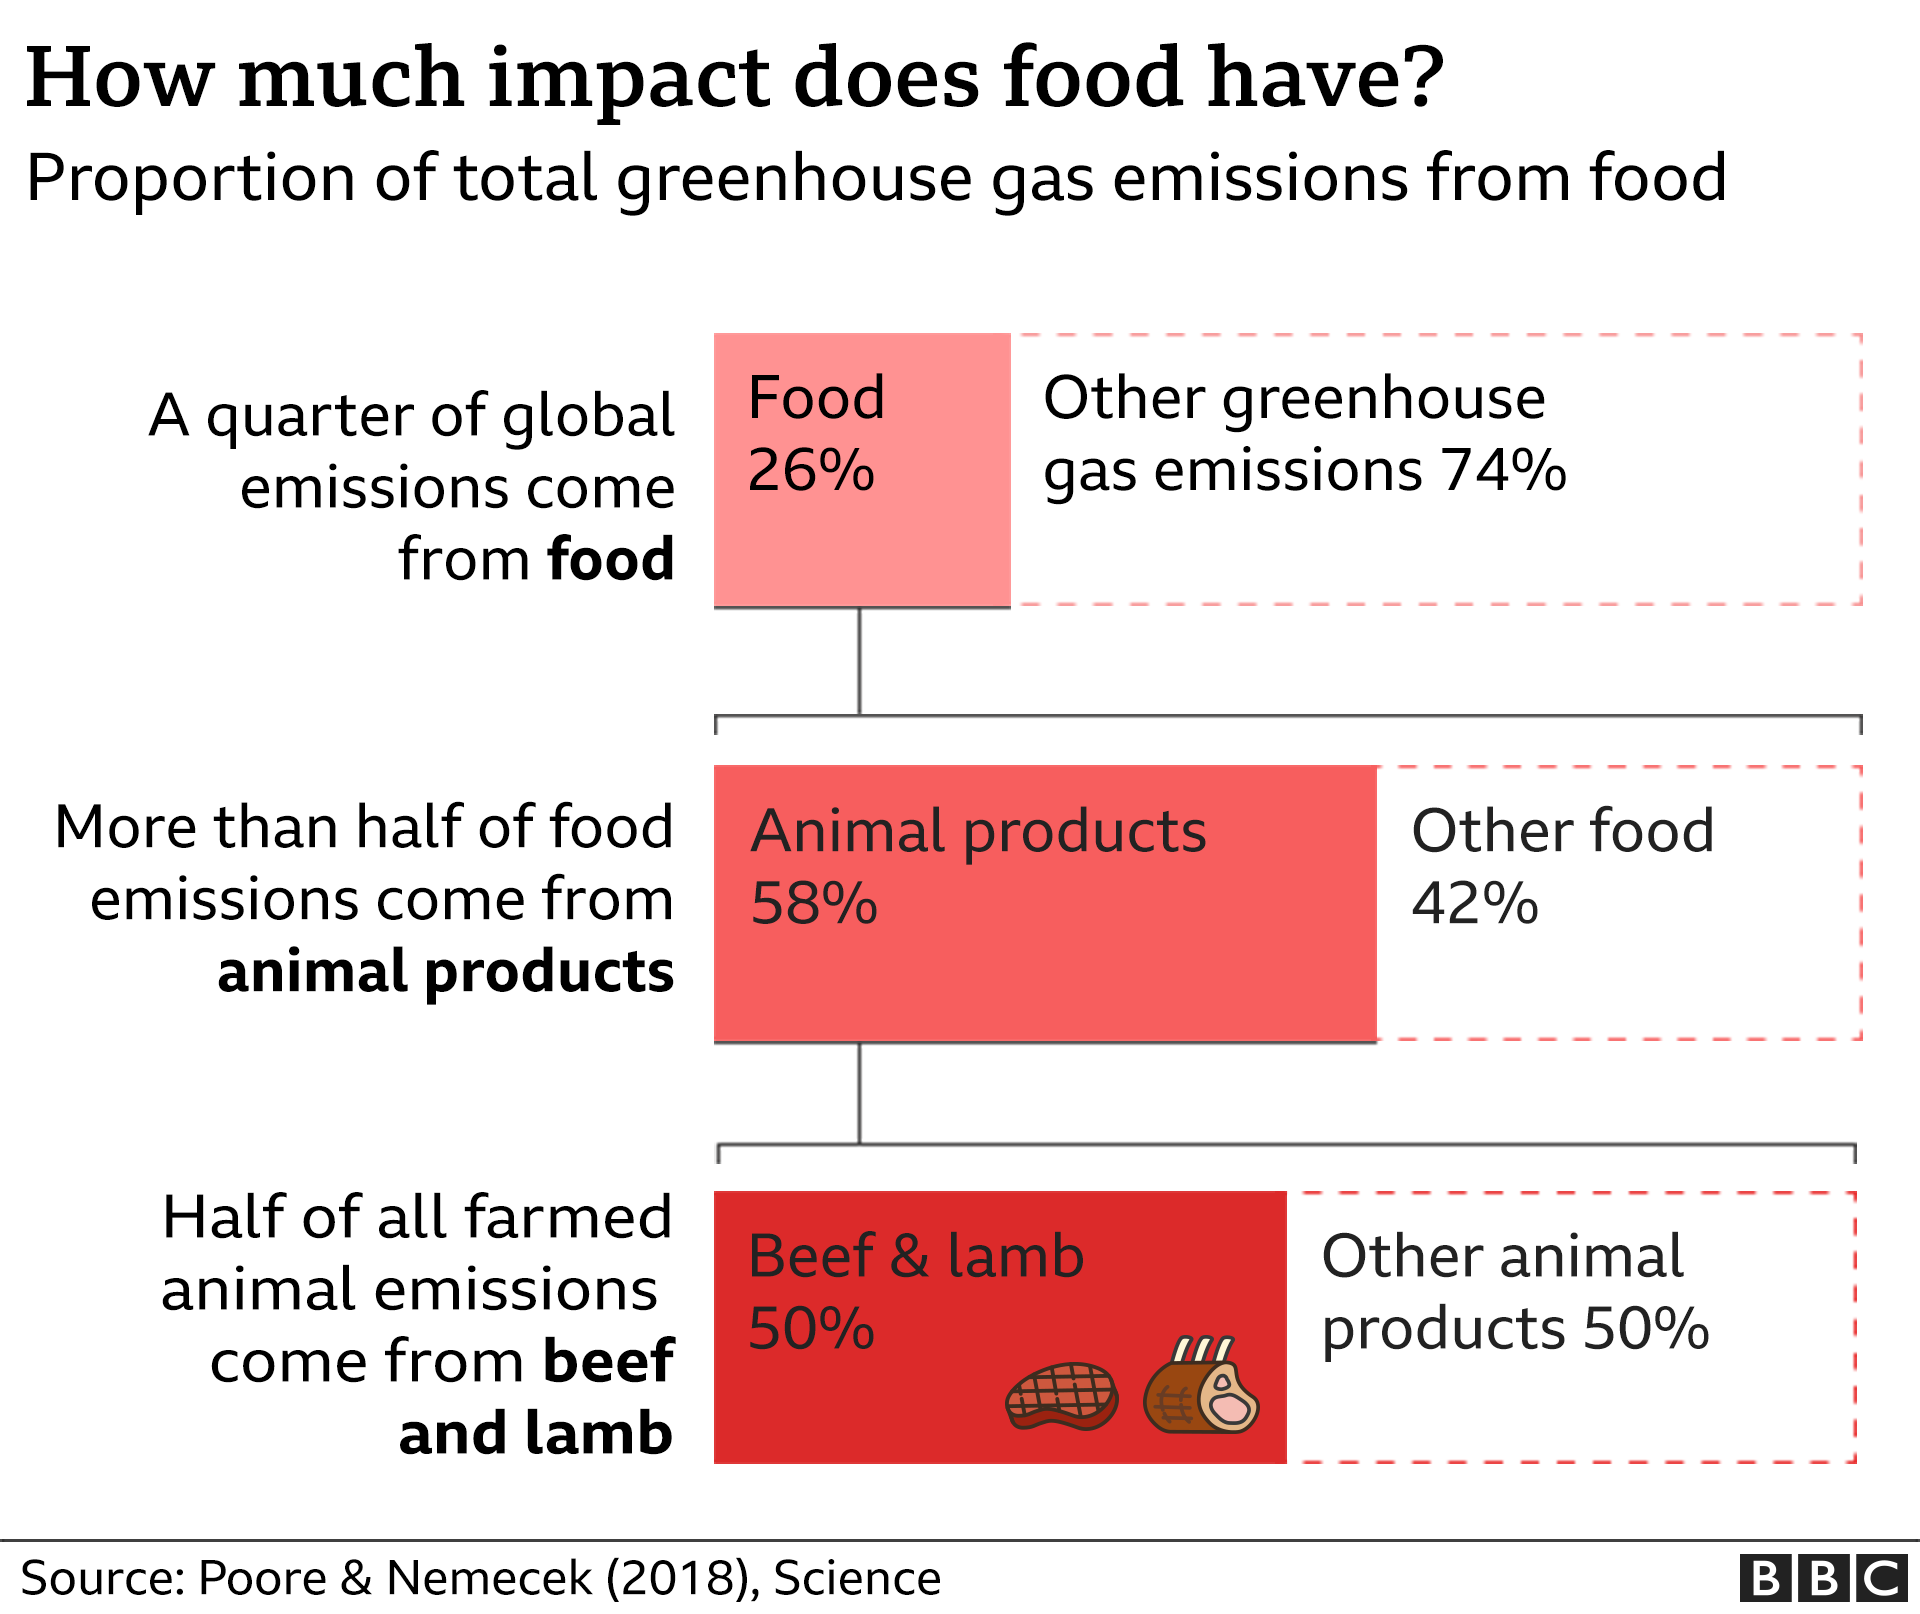 Chart showing that a quarter of global greenhouse gas emissions come from food, with more than half of food emissions coming from animal products and half of all farmed animal emissions come from beef and lamb